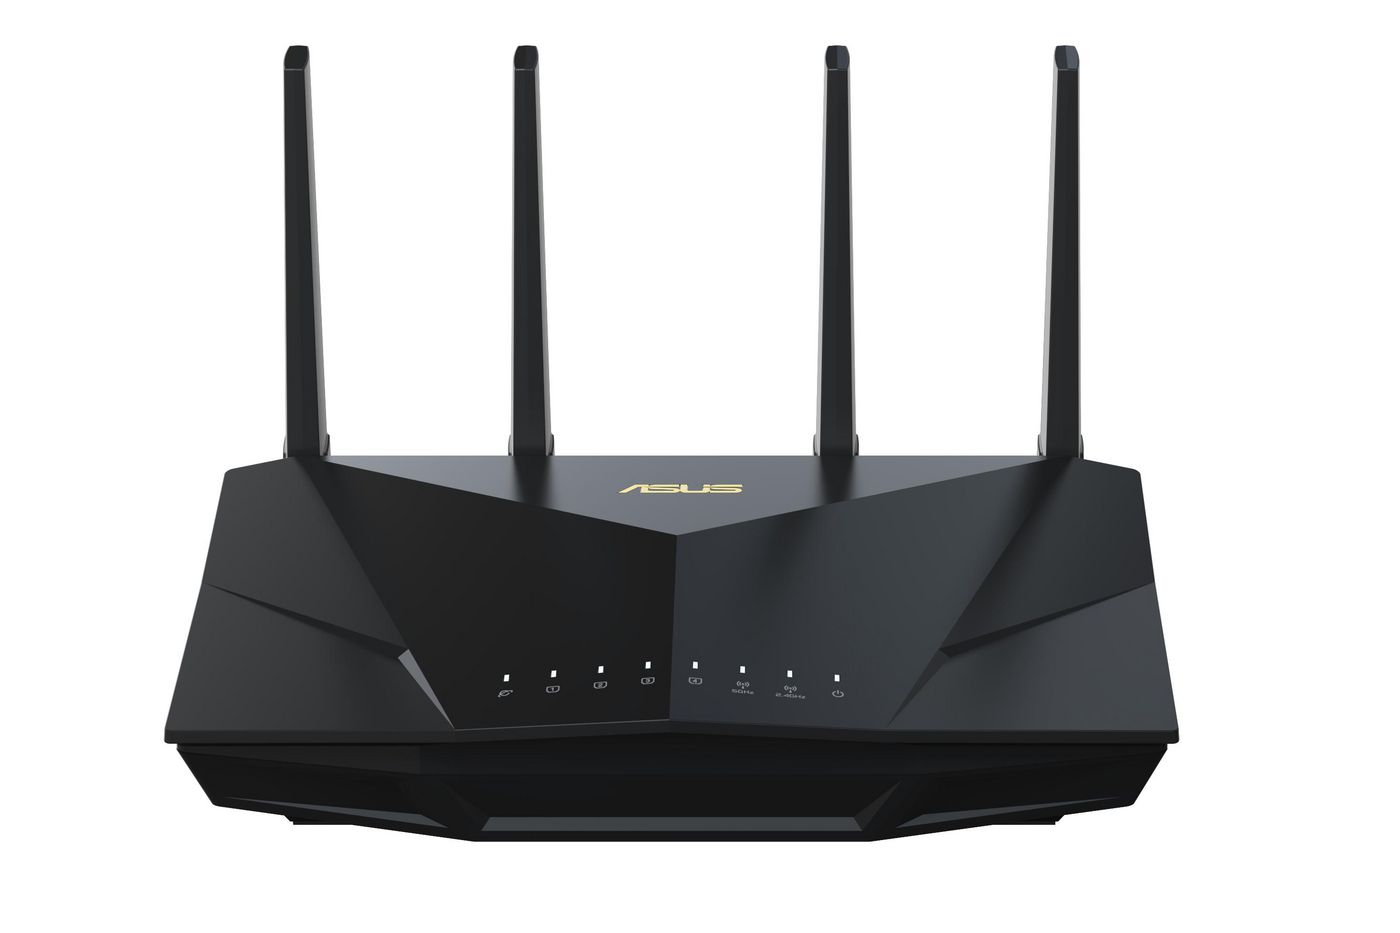 Asus 90IG0860-MO3B00 W128827111 Rt-Ax5400 Wireless Router 